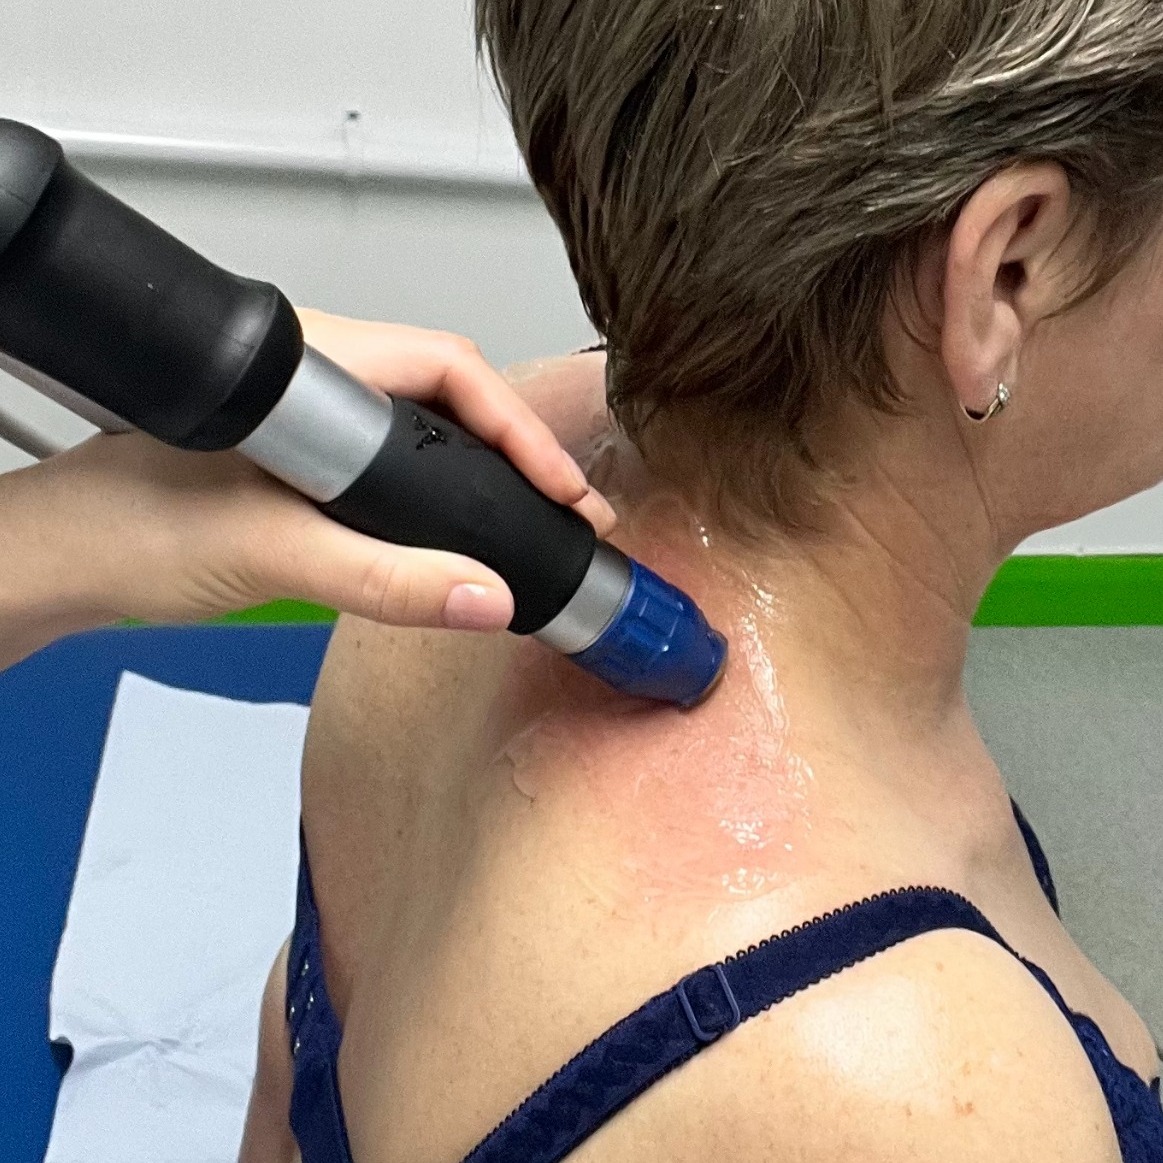 Physiotherapist doing shockwave therapy on the shoulder of a woman.